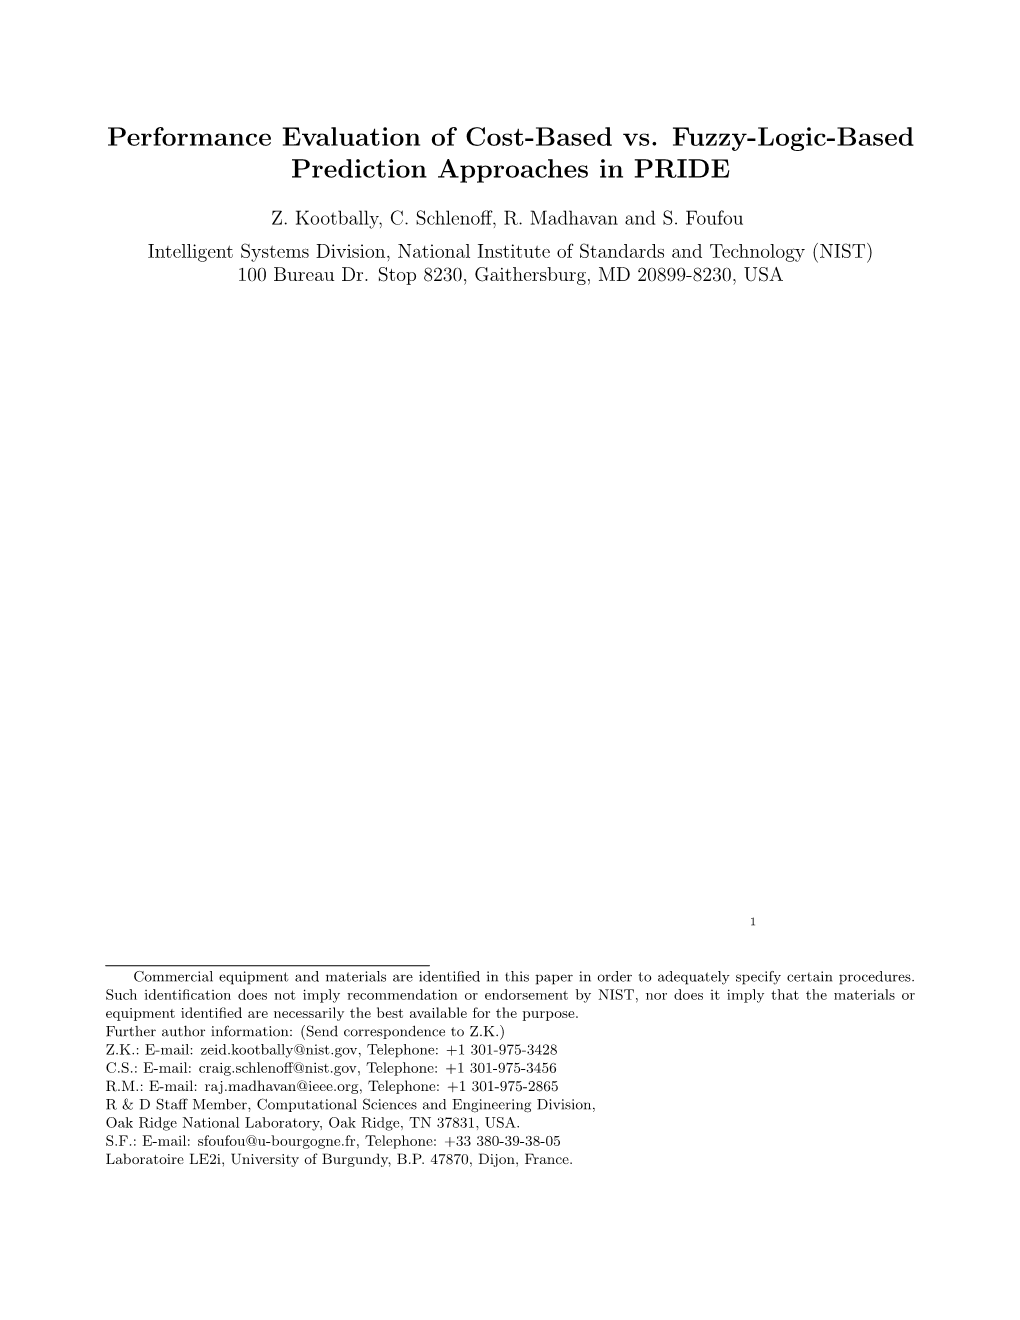 Performance Evaluation of Cost-Based Vs. Fuzzy-Logic-Based Prediction Approaches in PRIDE